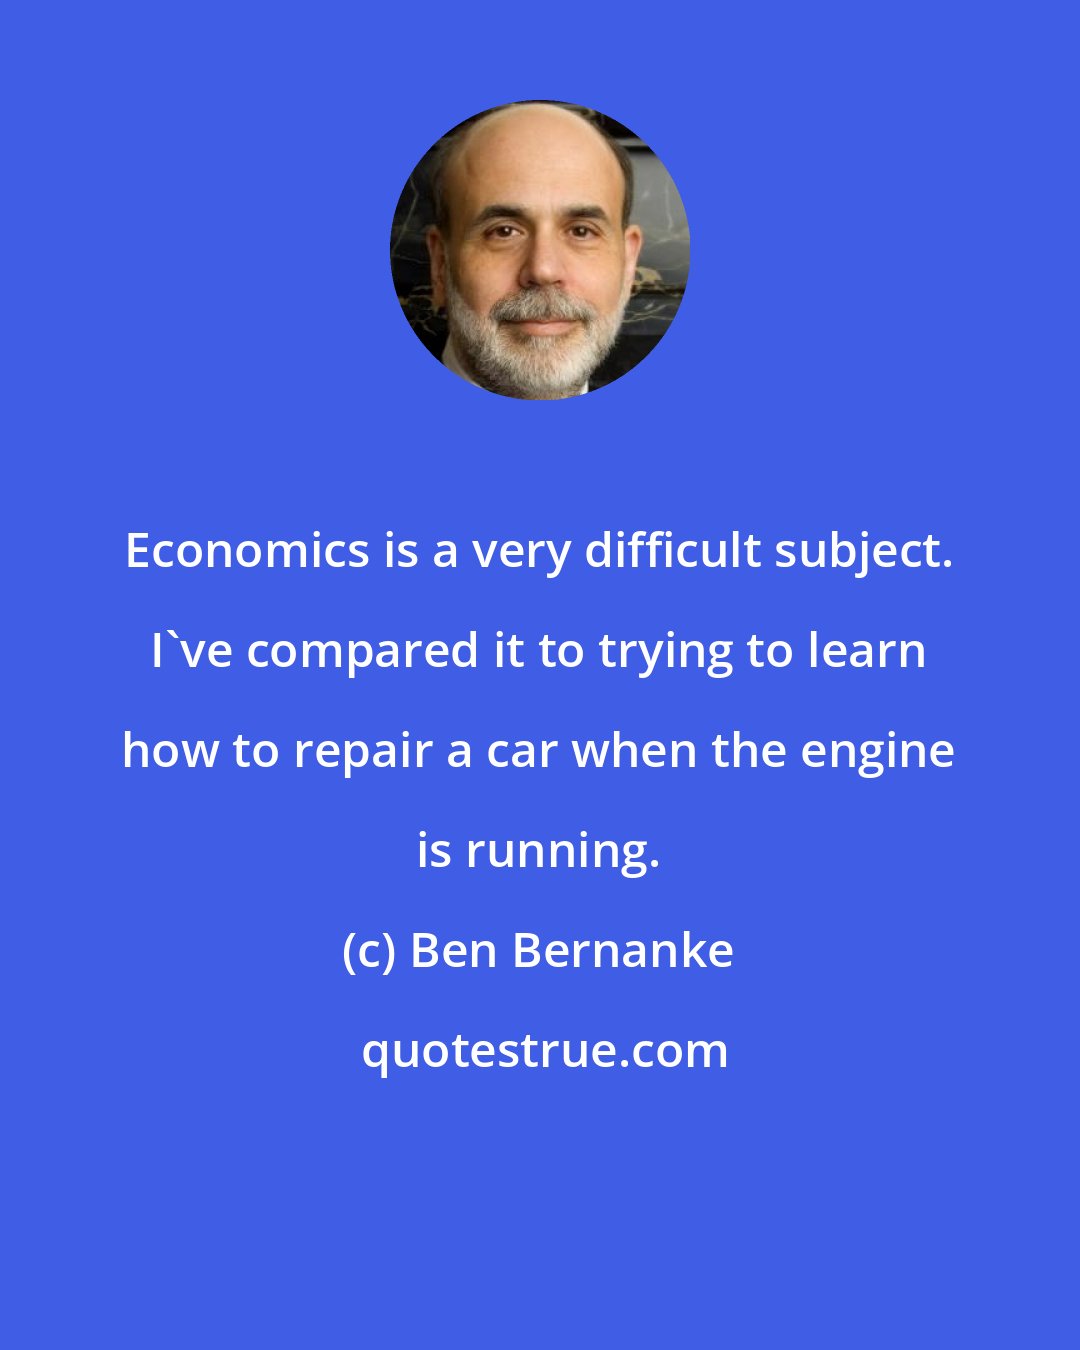 Ben Bernanke: Economics is a very difficult subject. I've compared it to trying to learn how to repair a car when the engine is running.